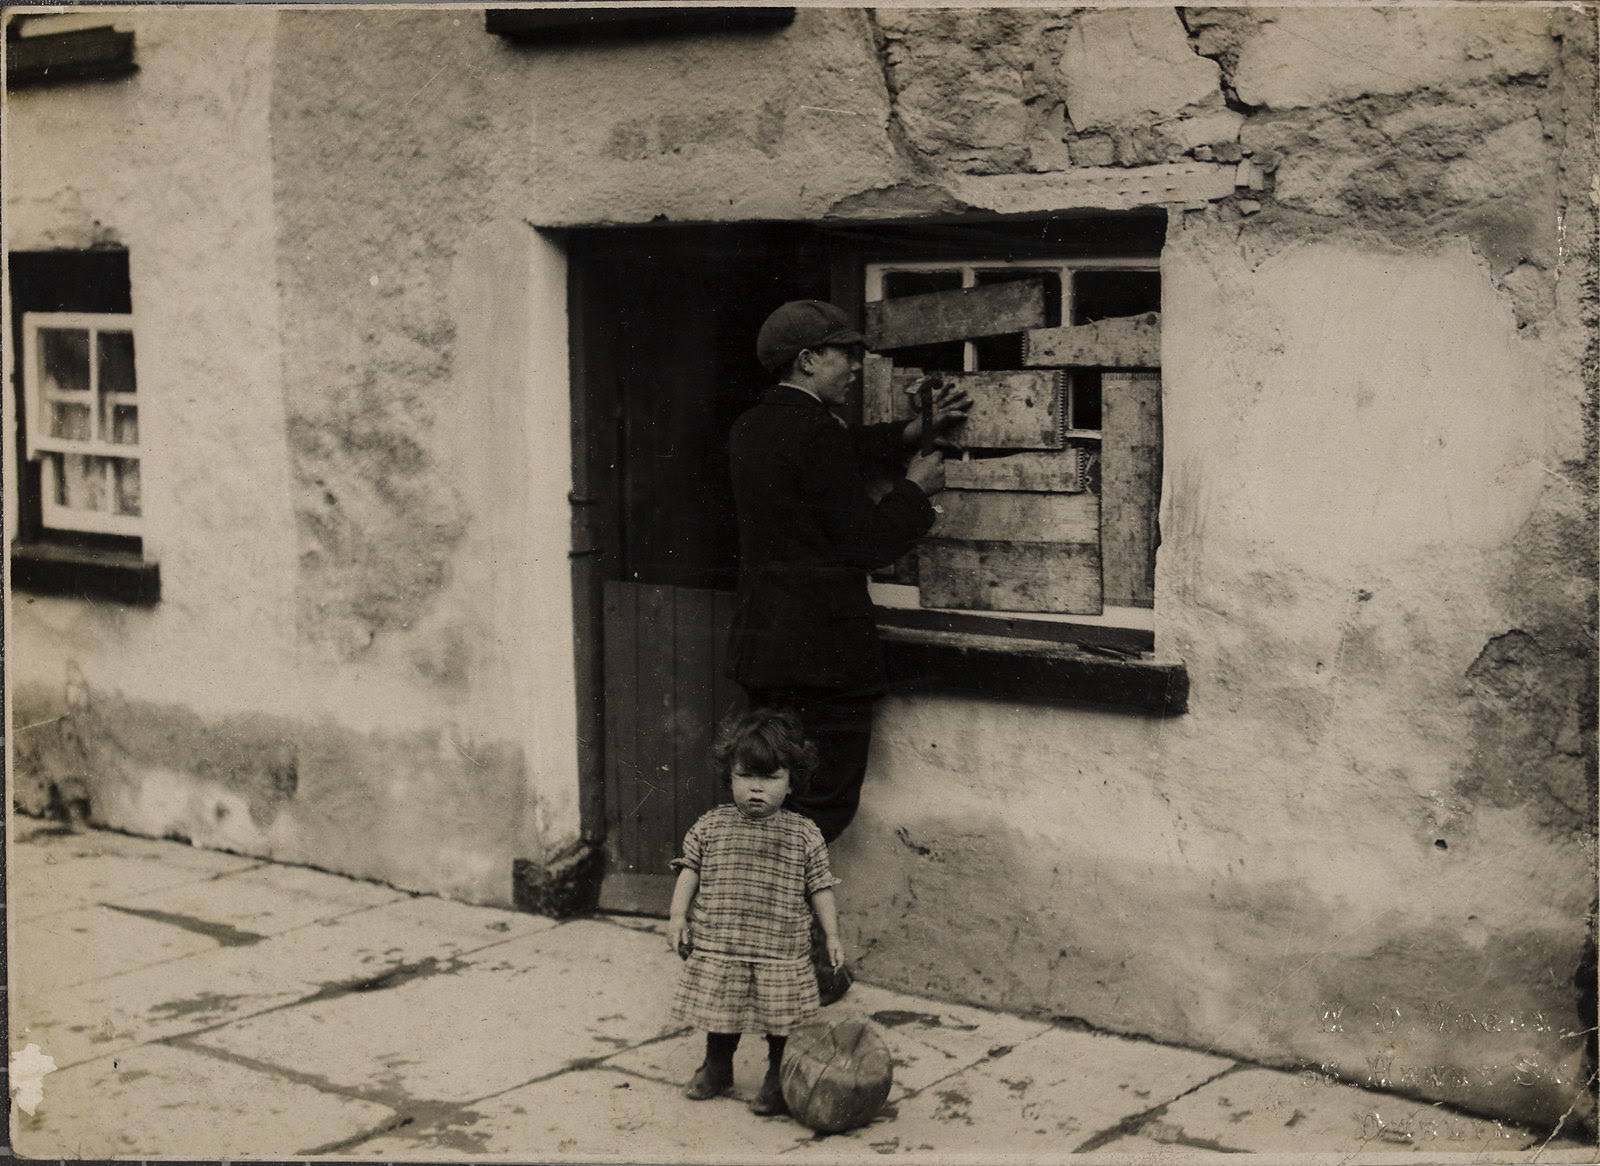 House in Templemore in aftermath of raid by Tans - boy boarding up window and child with a small ball | by National Library of Ireland on The Commons